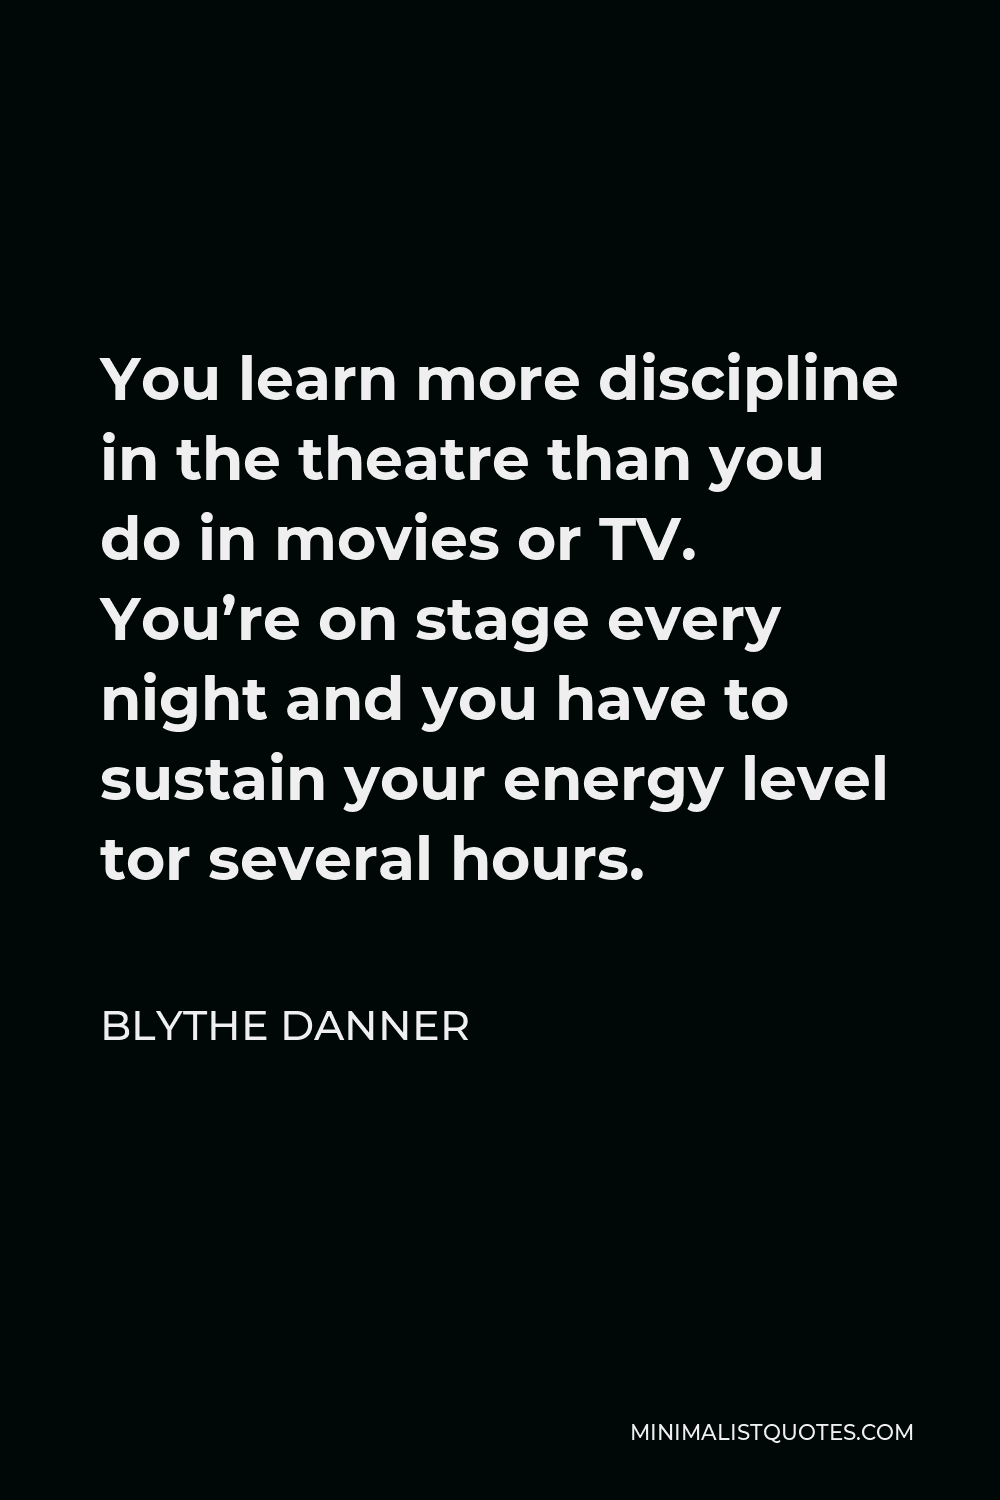 Blythe Danner Quote - You learn more discipline in the theatre than you do in movies or TV. You’re on stage every night and you have to sustain your energy level tor several hours.